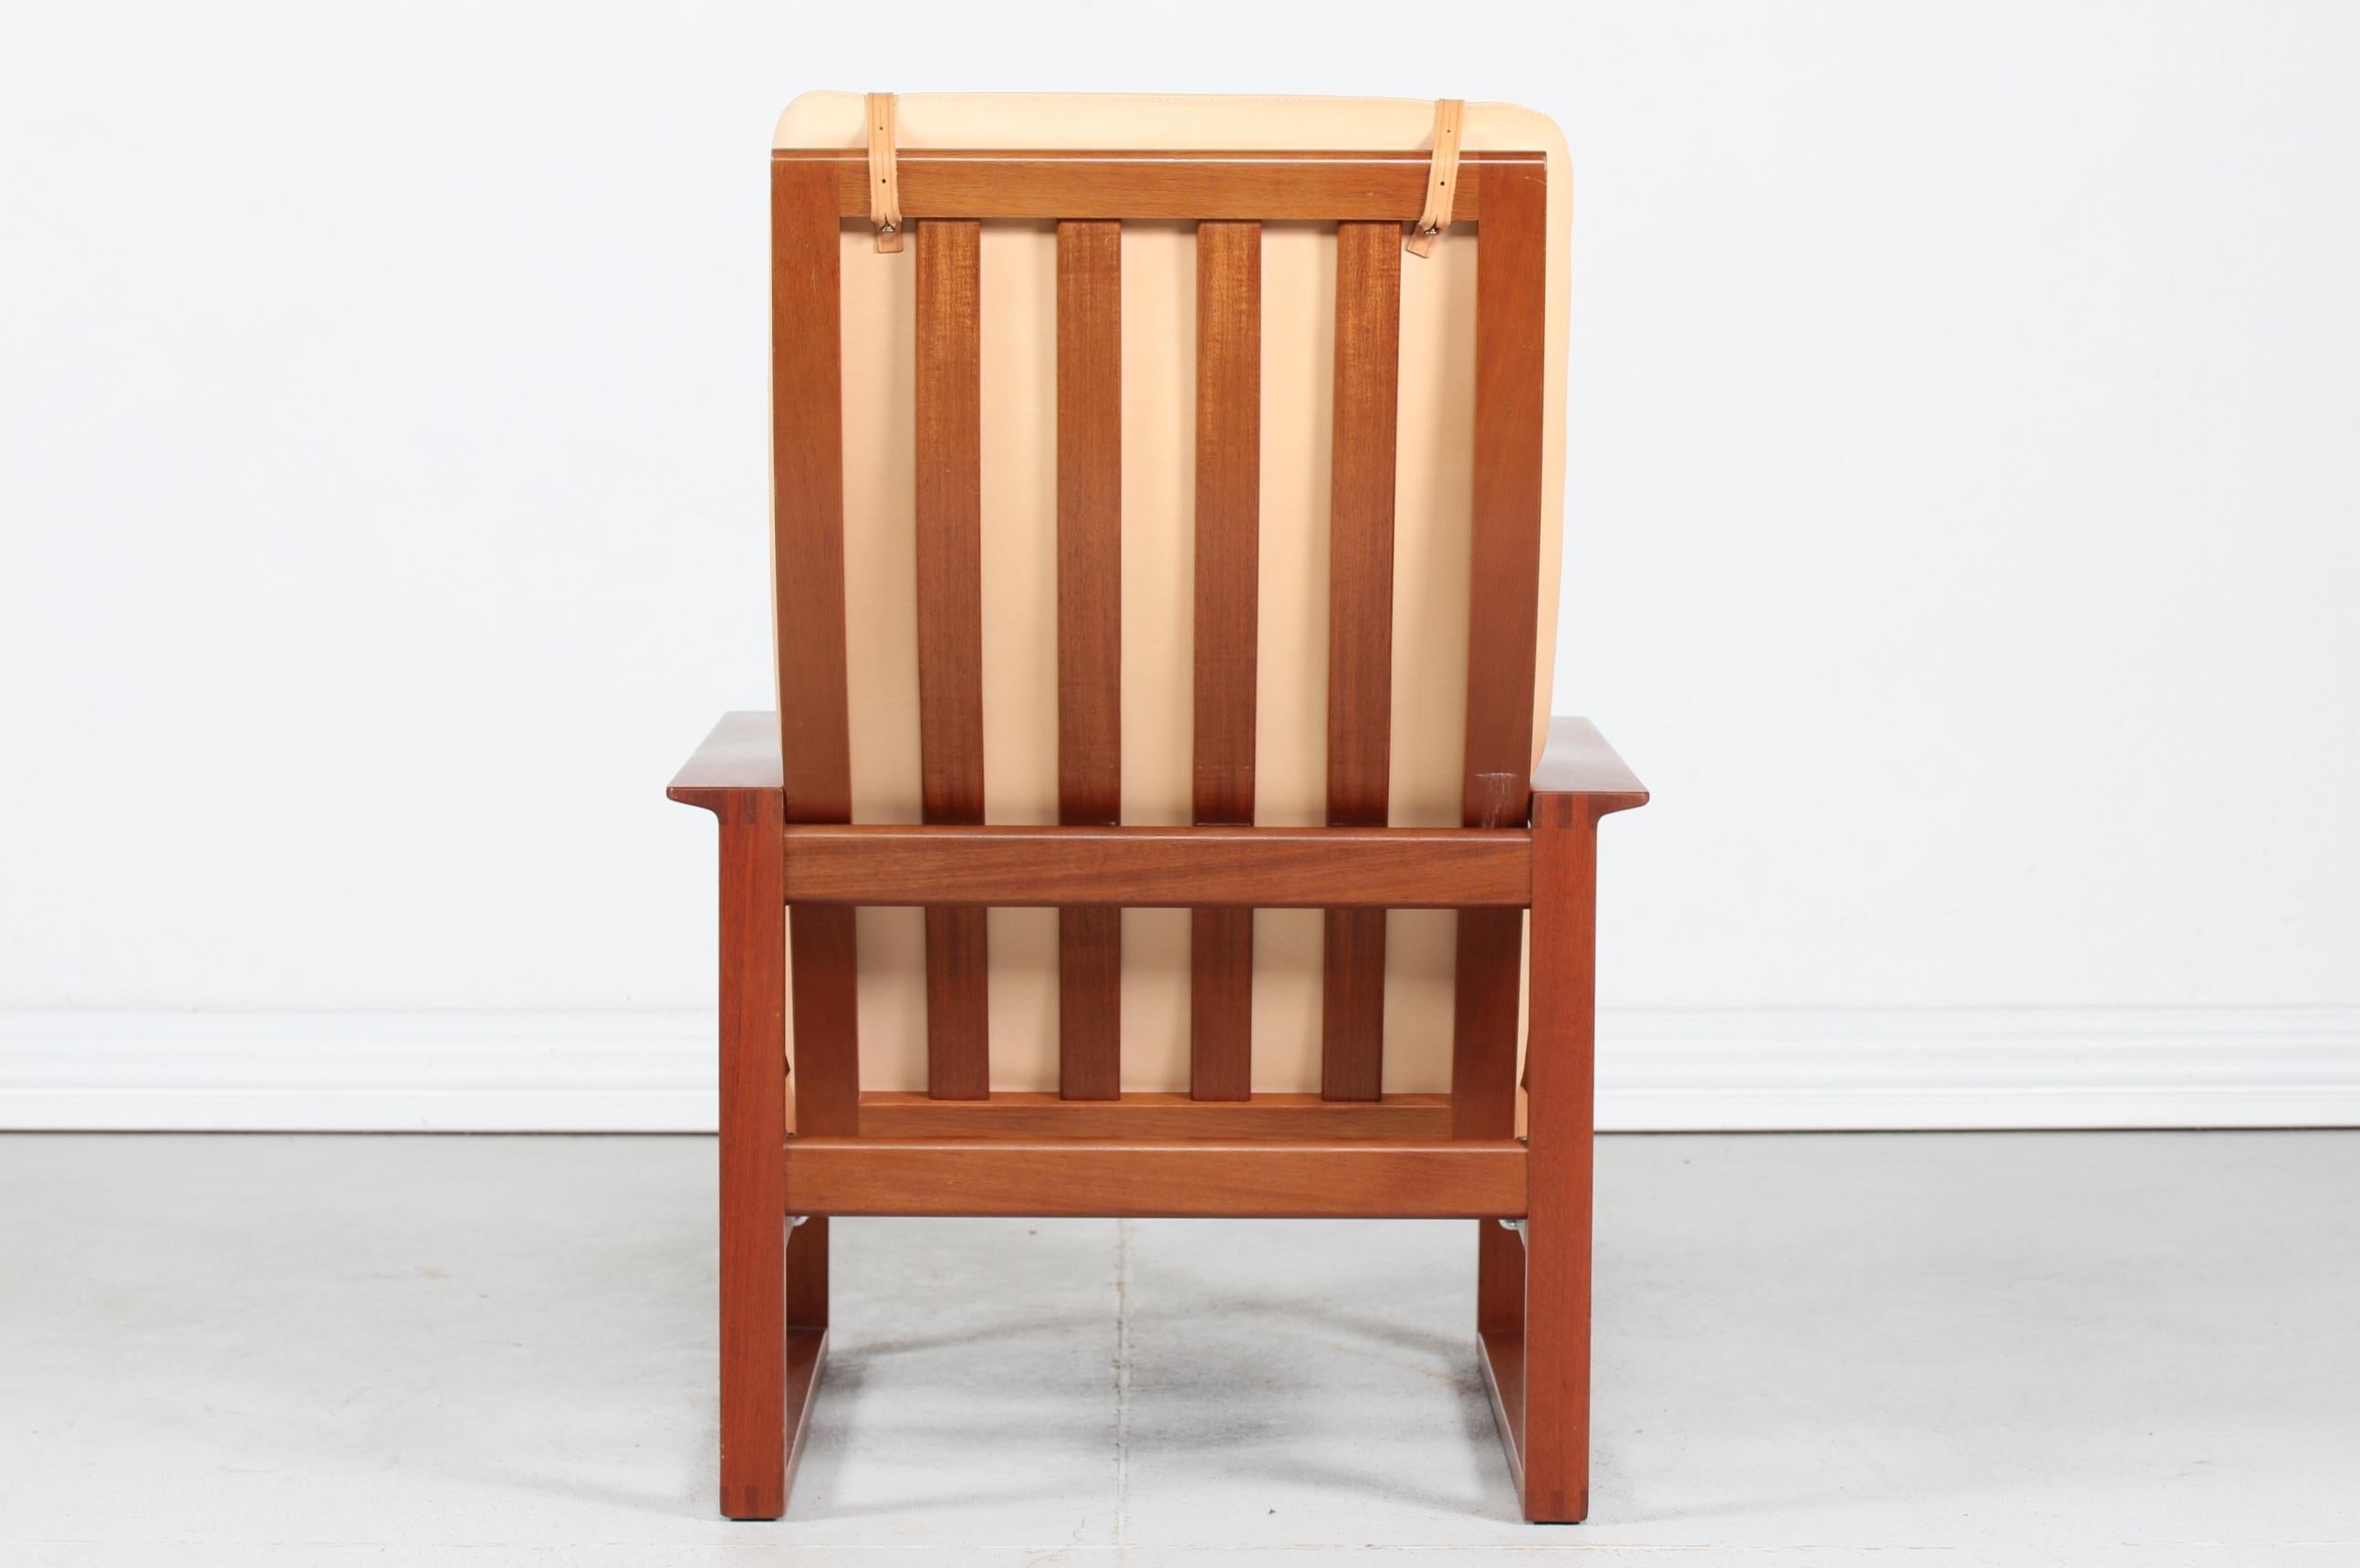 Late 20th Century Børge Mogensen Sled Chair 2254 with Aniline Leather by Fredericia Stolefabrik